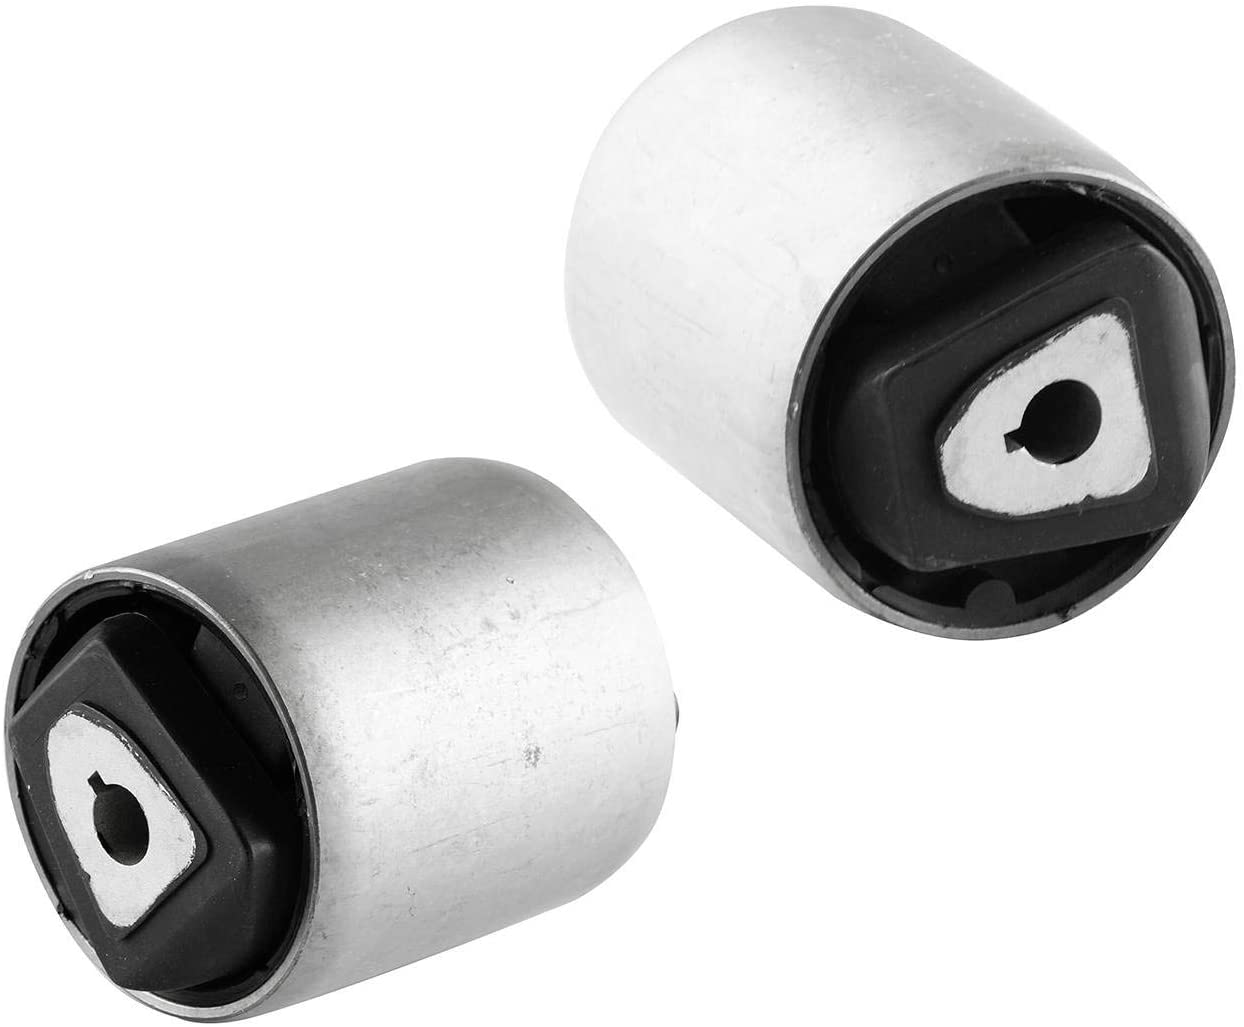 Bapmic 31106778015 Front Control Arm Bushing for BMW E70 E71 (Pack of 2) (2 Pcs)